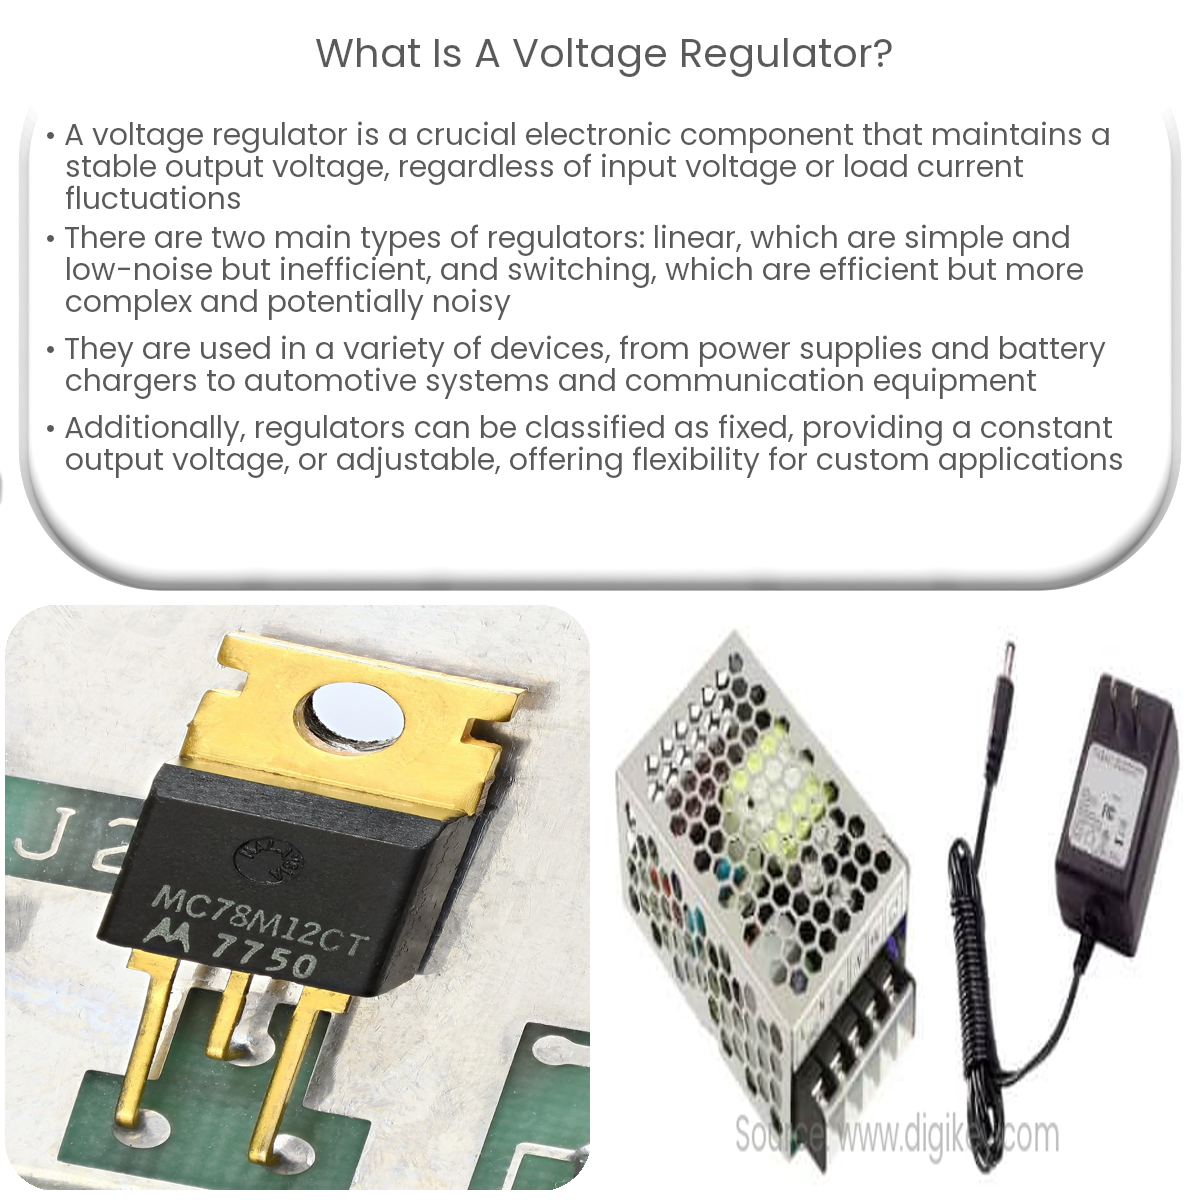 What is a voltage regulator?